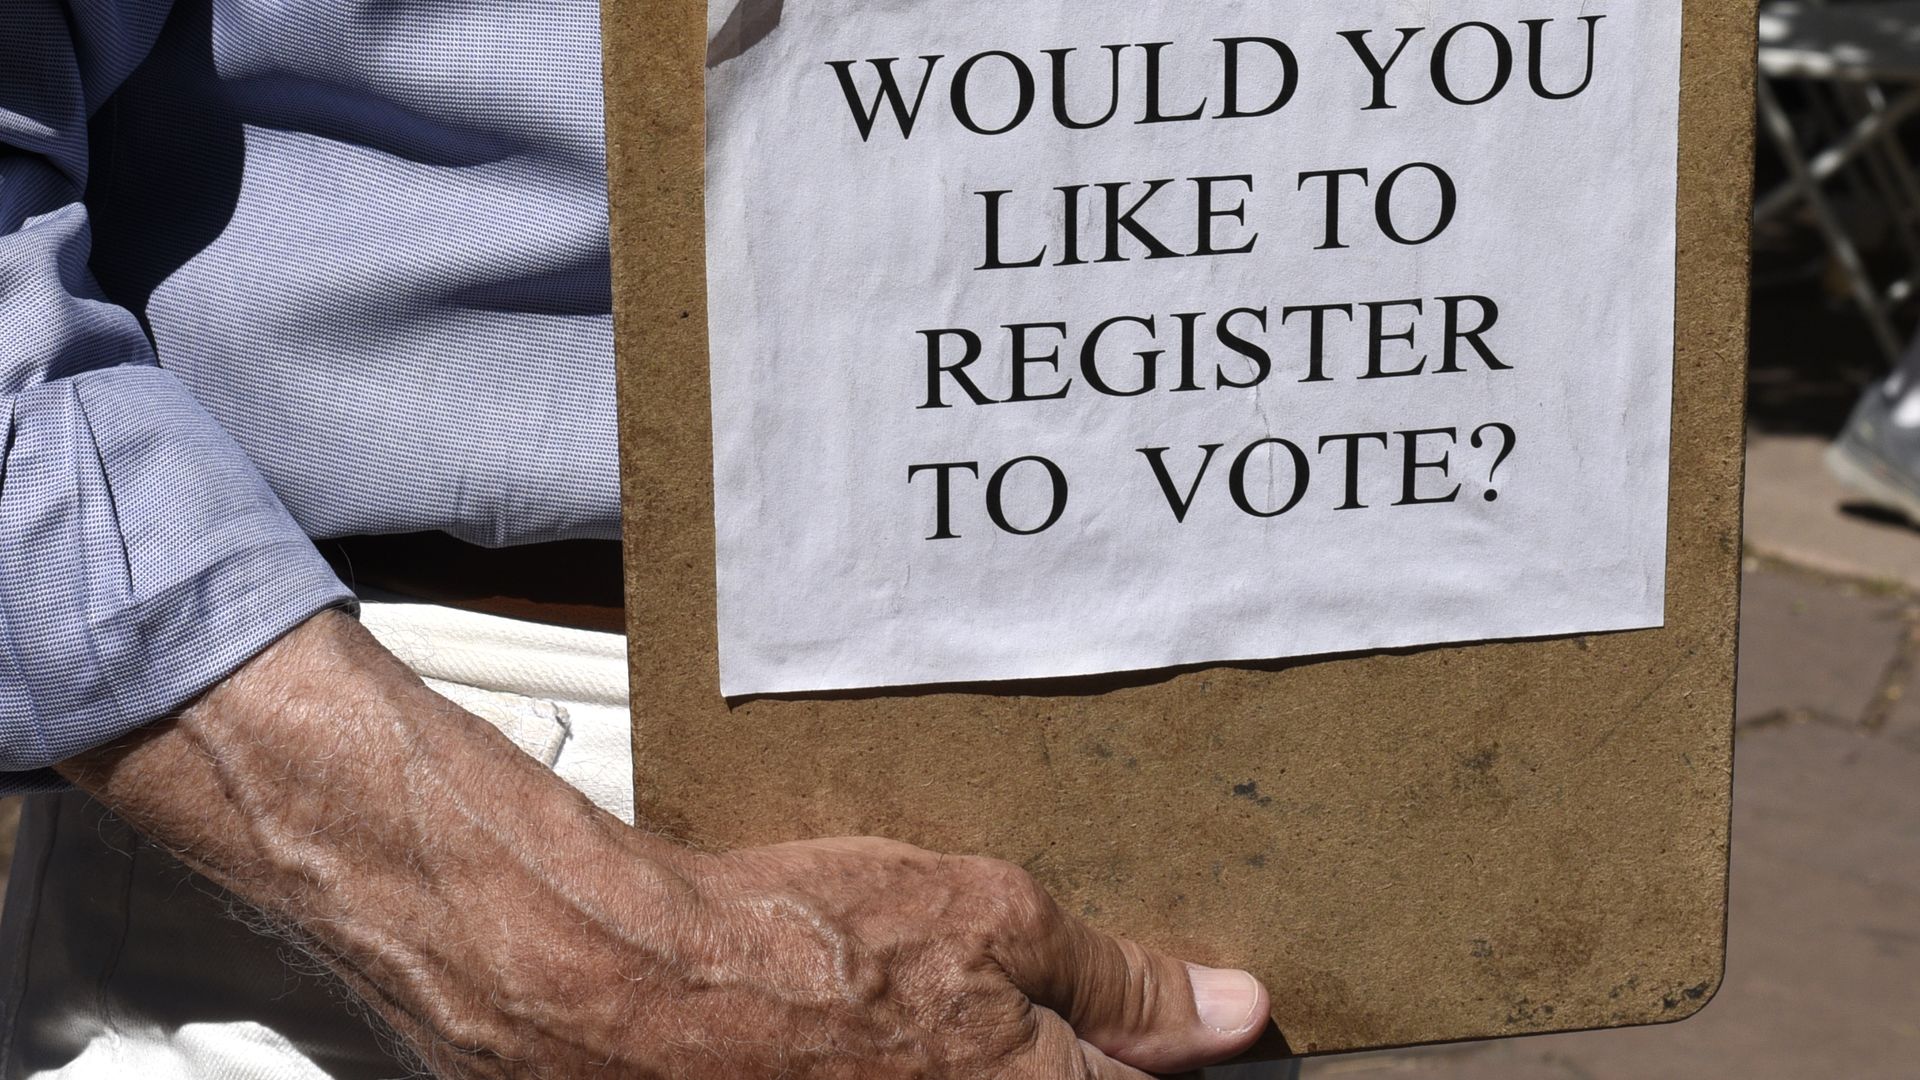 A voter registrar holding a clipboard that reads "Would you like to register to vote?"